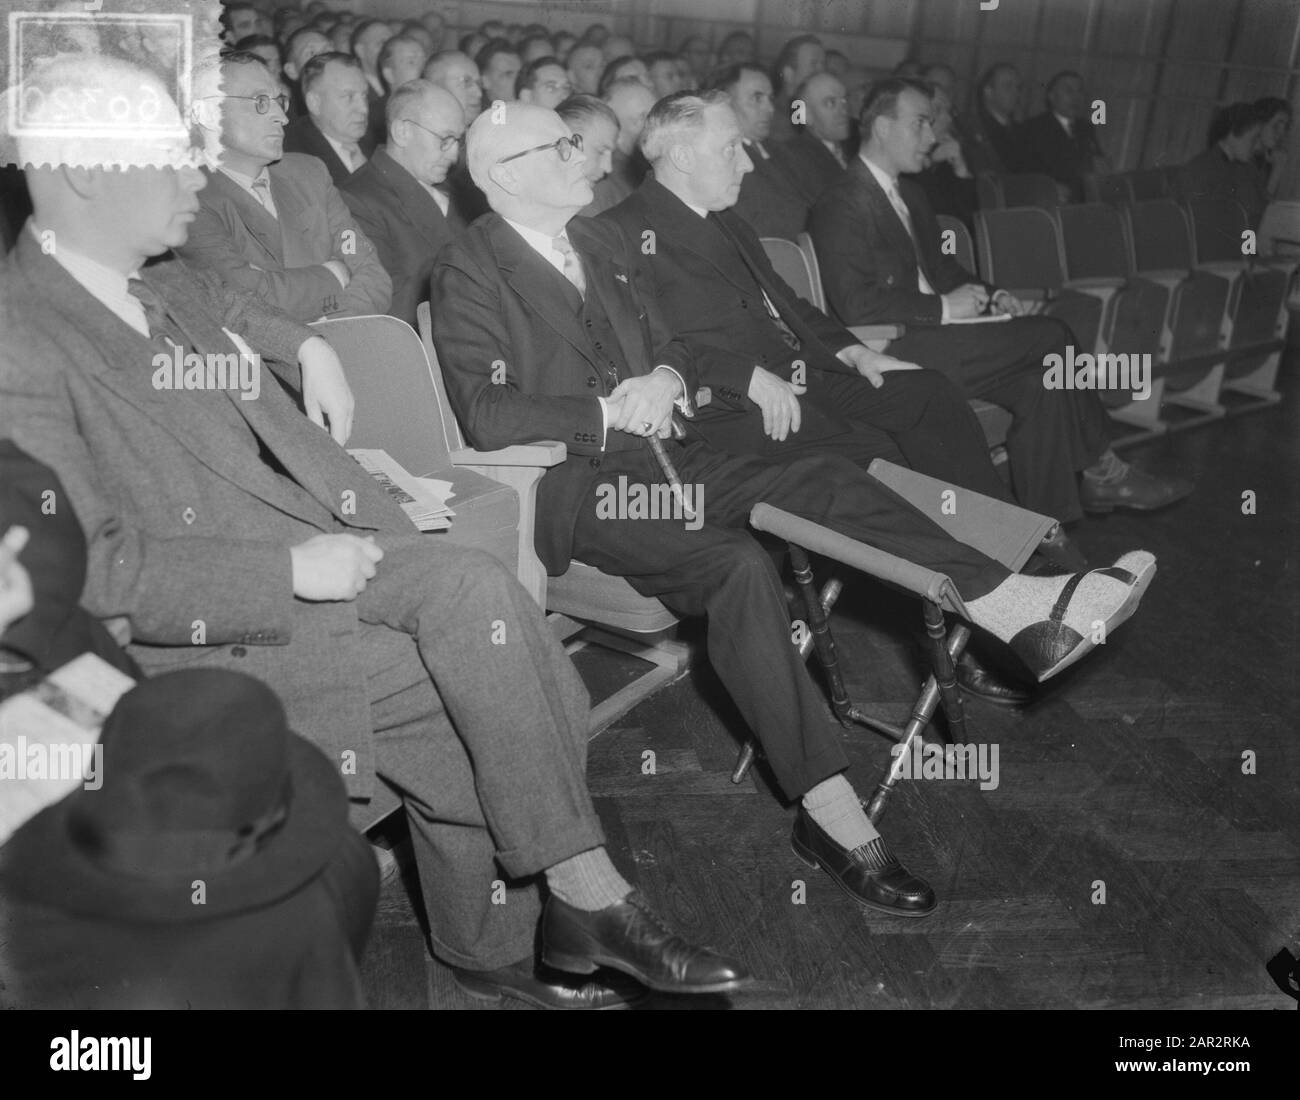 Wages congress of the Catholic Workers Movement (KAB) in Utrecht in building K & W. The chairman of the KVP Group, Prof. mr. C.P.M. Romom with injured foot belonged to the guests. Next to Prof. Romme sits dr. Oilerook Date: 13 October 1953 Location: Utrecht Keywords: congresses, trade unions Personal name: Kab, Romme Stock Photo